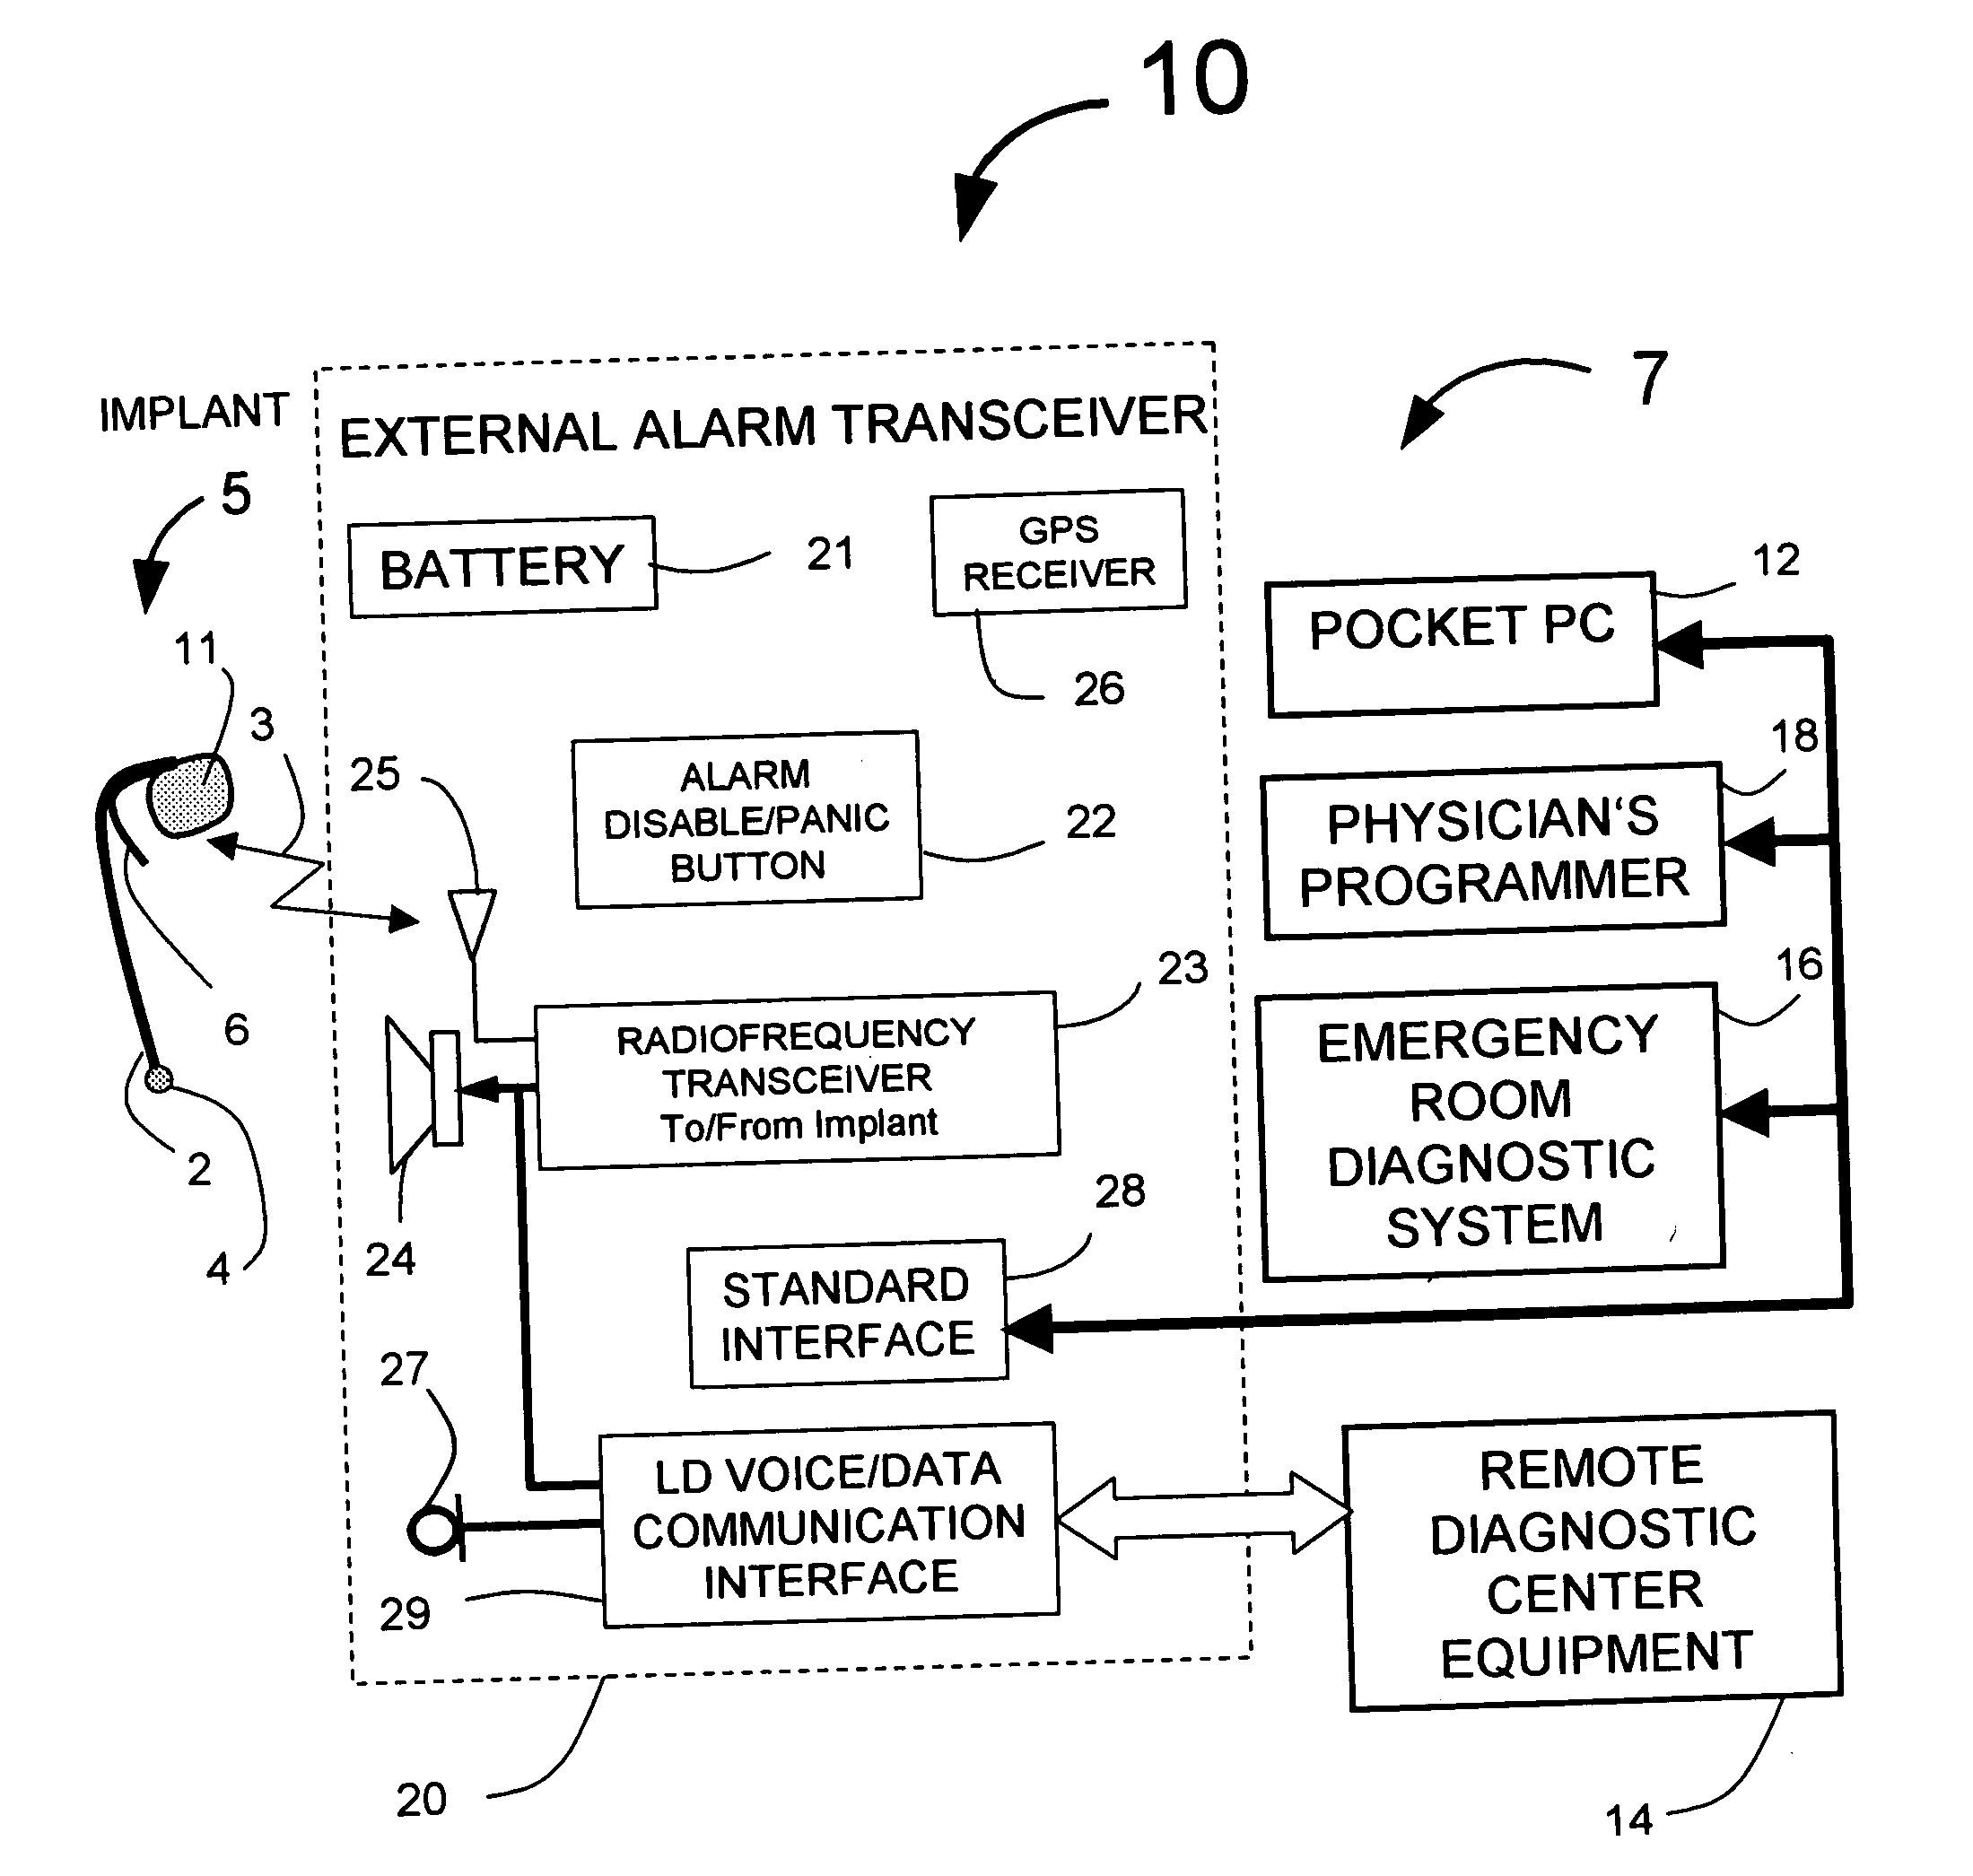 Electrogram signal filtering in systems for detecting ischemia